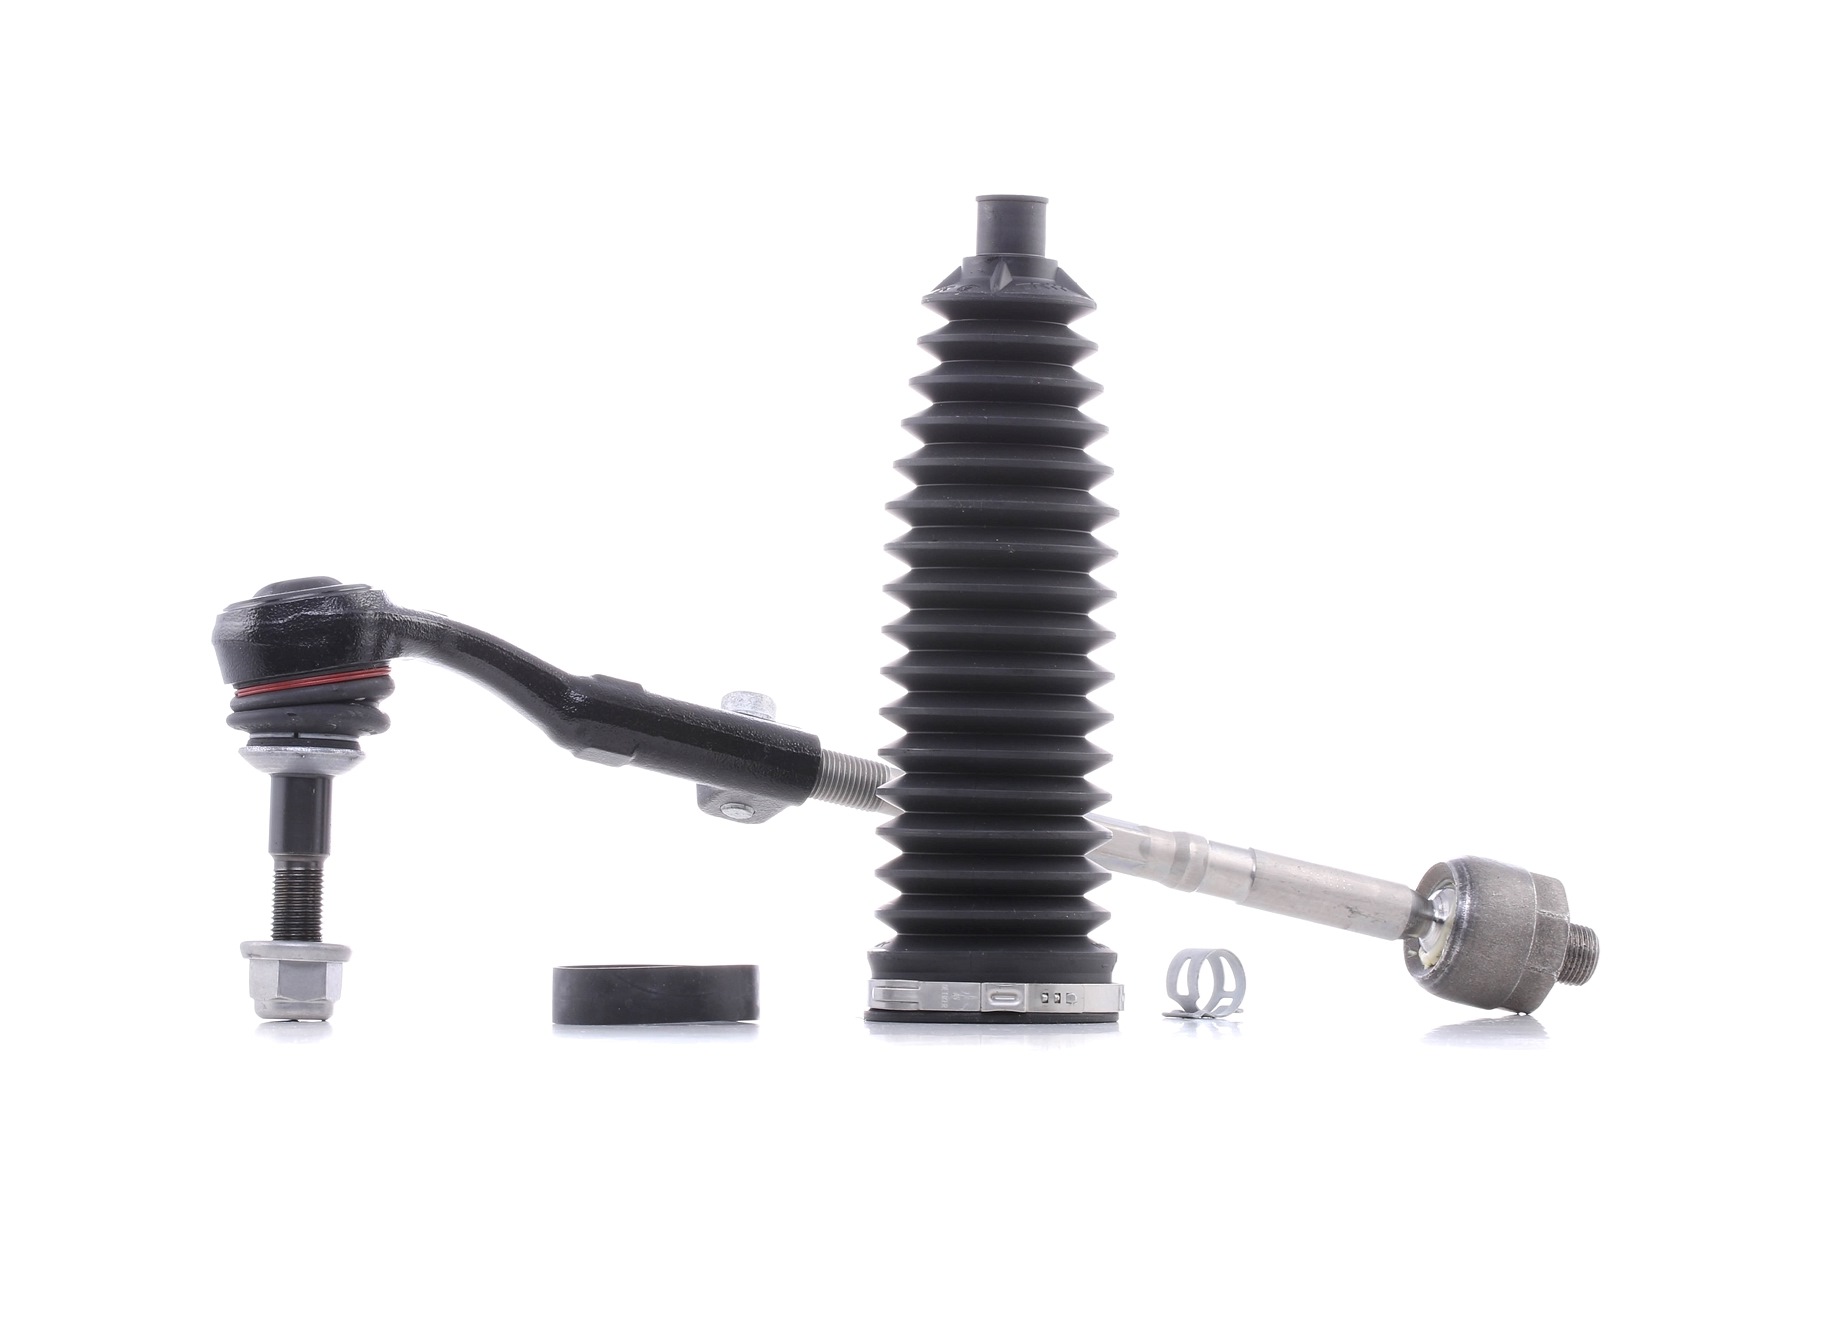 TRW JRA529 Rod Assembly with accessories